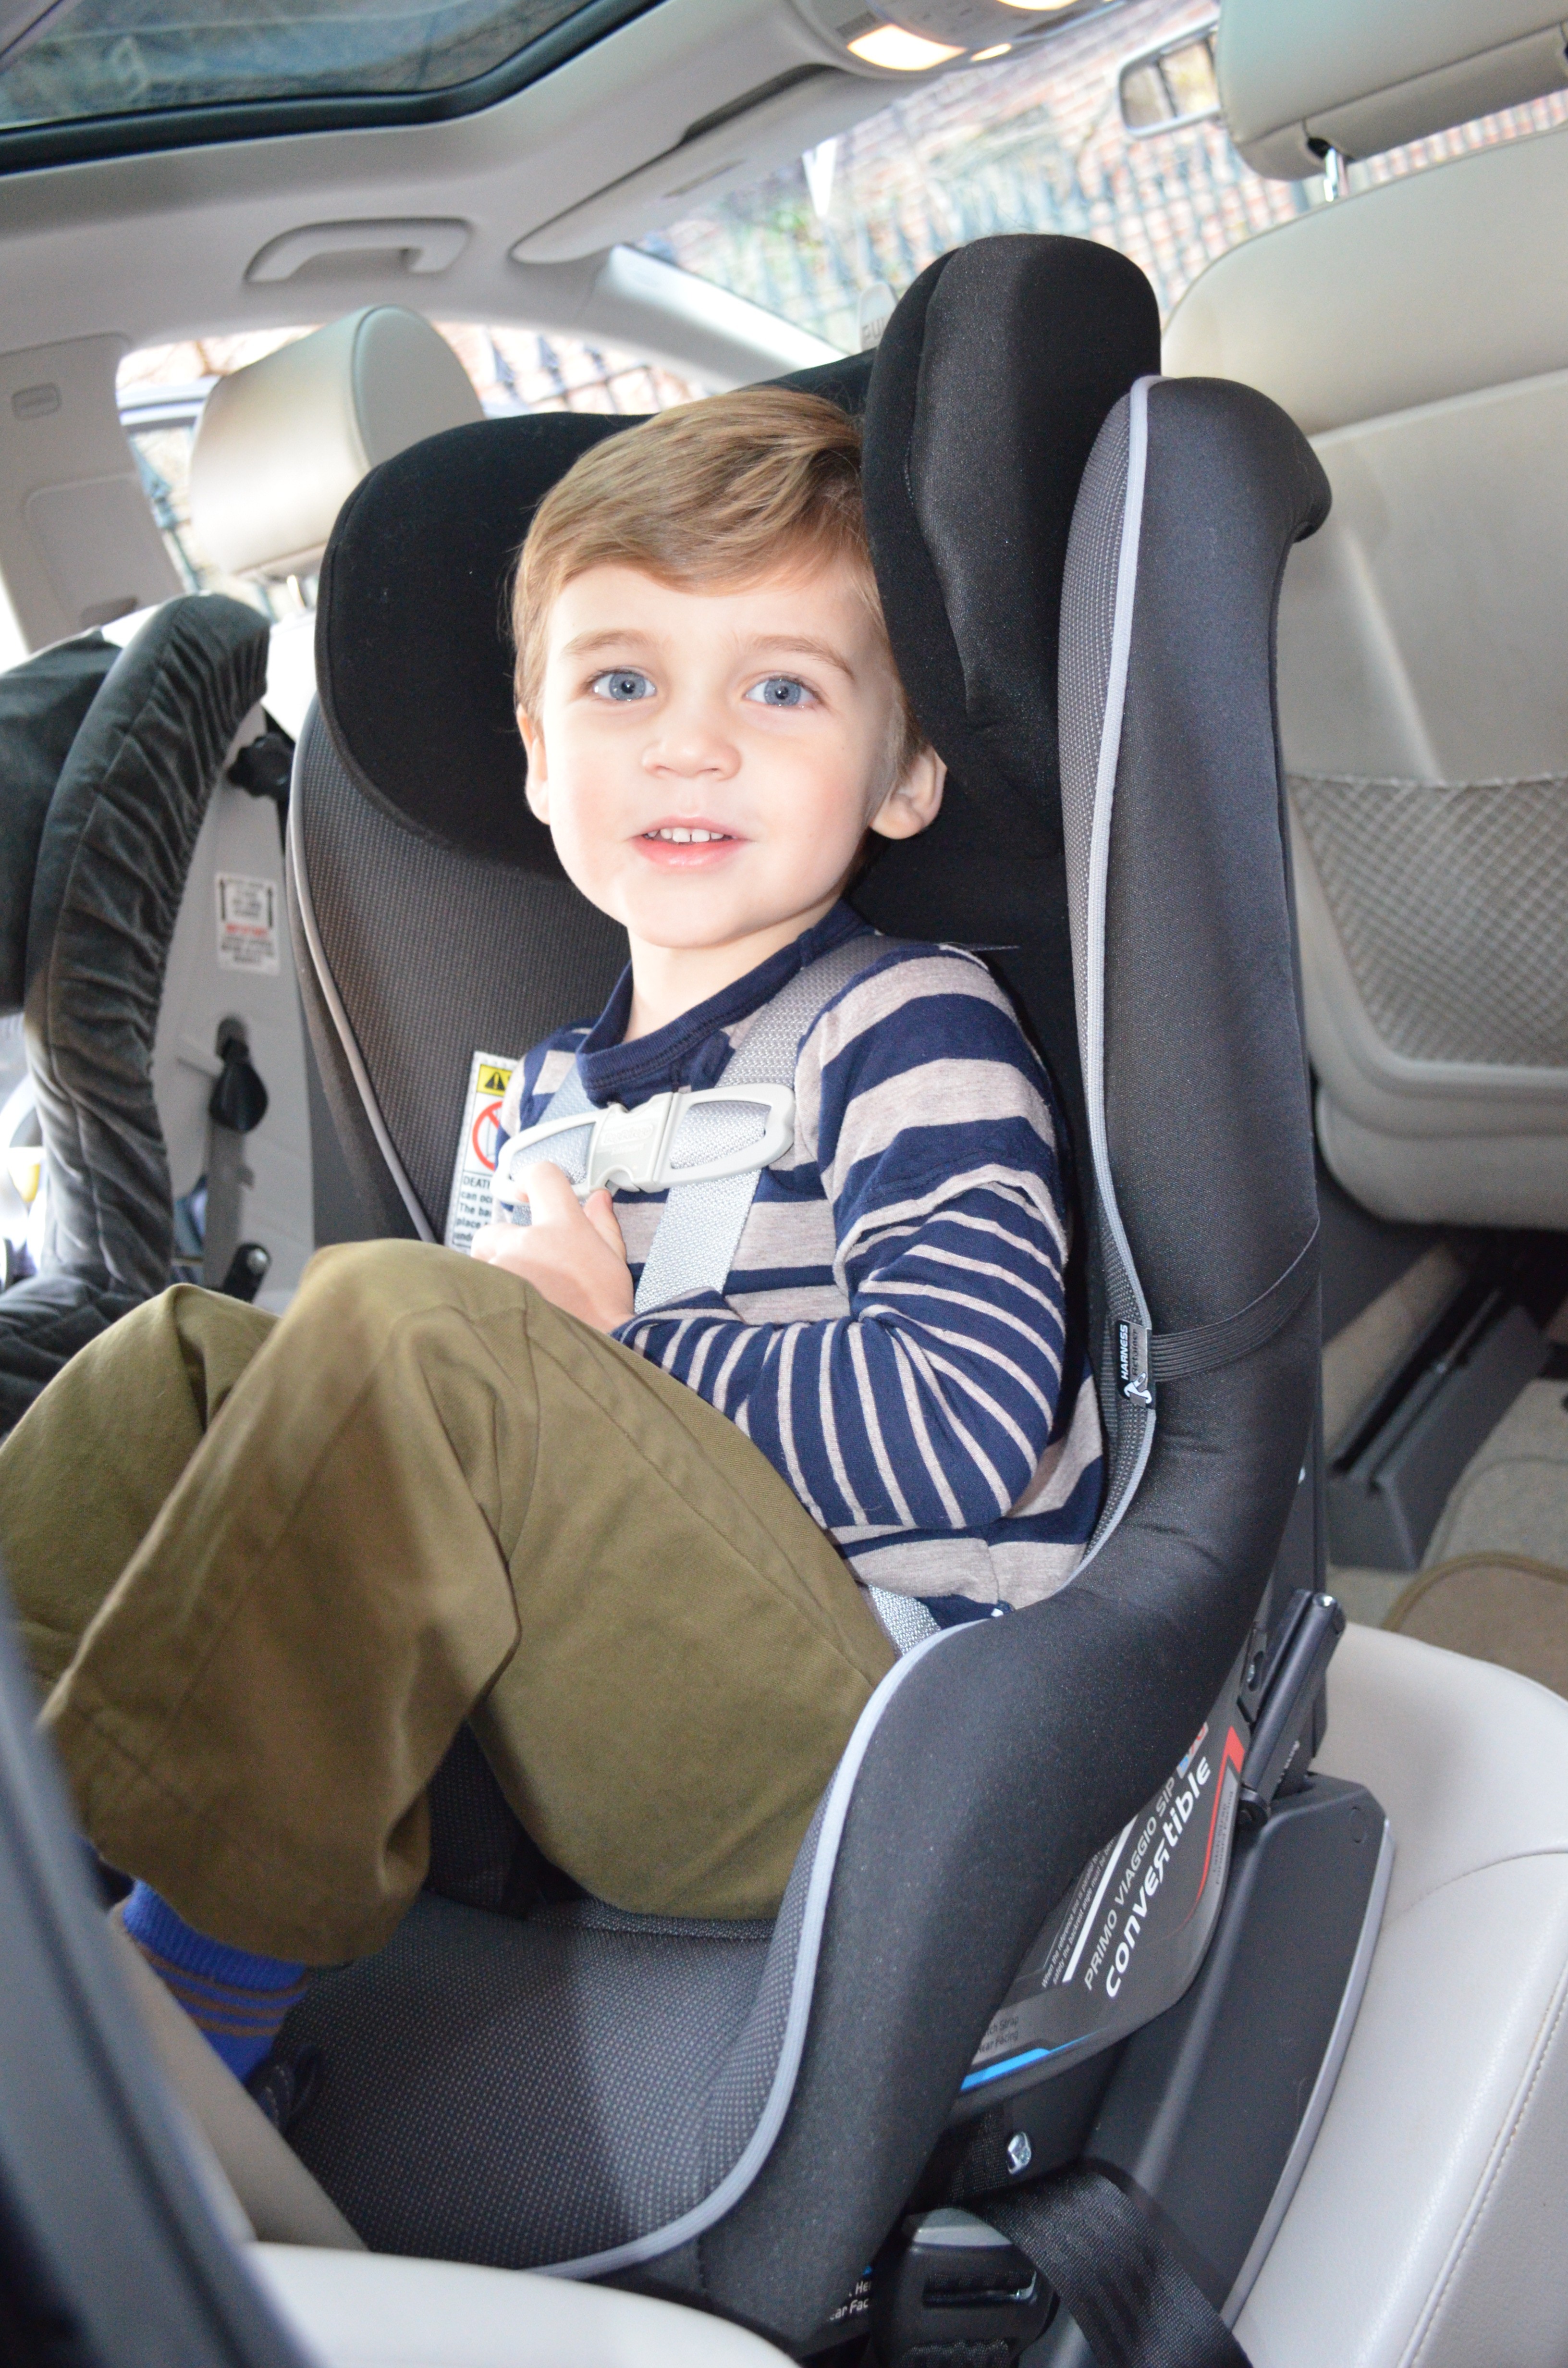 Your Child Turn Forward Facing, When Do You Switch Car Seat To Forward Facing